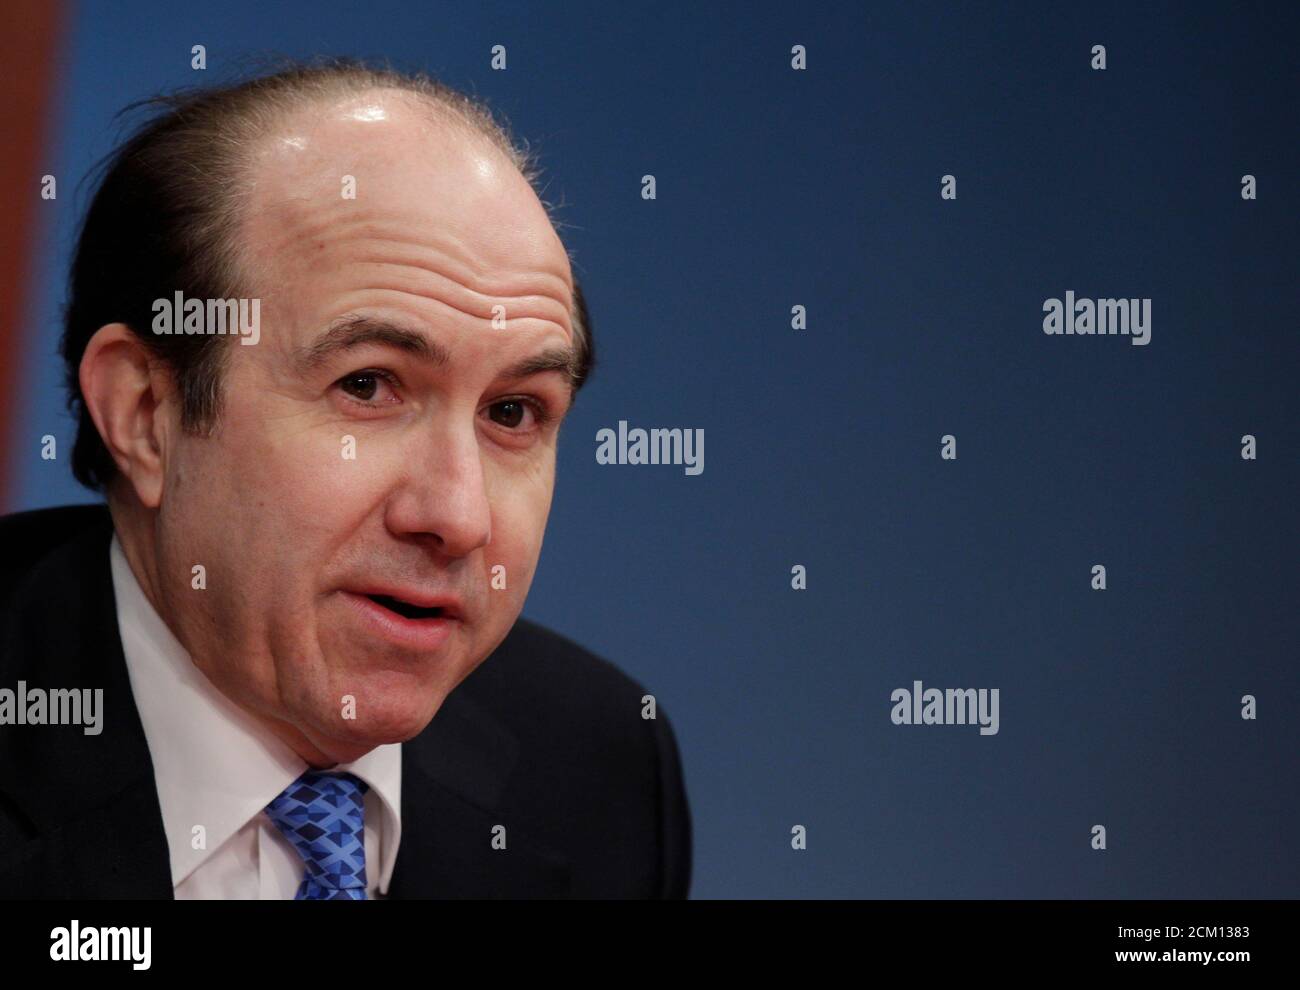 Philippe Dauman, president and CEO of Viacom, speaks at the Reuters Global Media Summit in New York December 2, 2010.   REUTERS/Brendan McDermid/File Photo Stock Photo